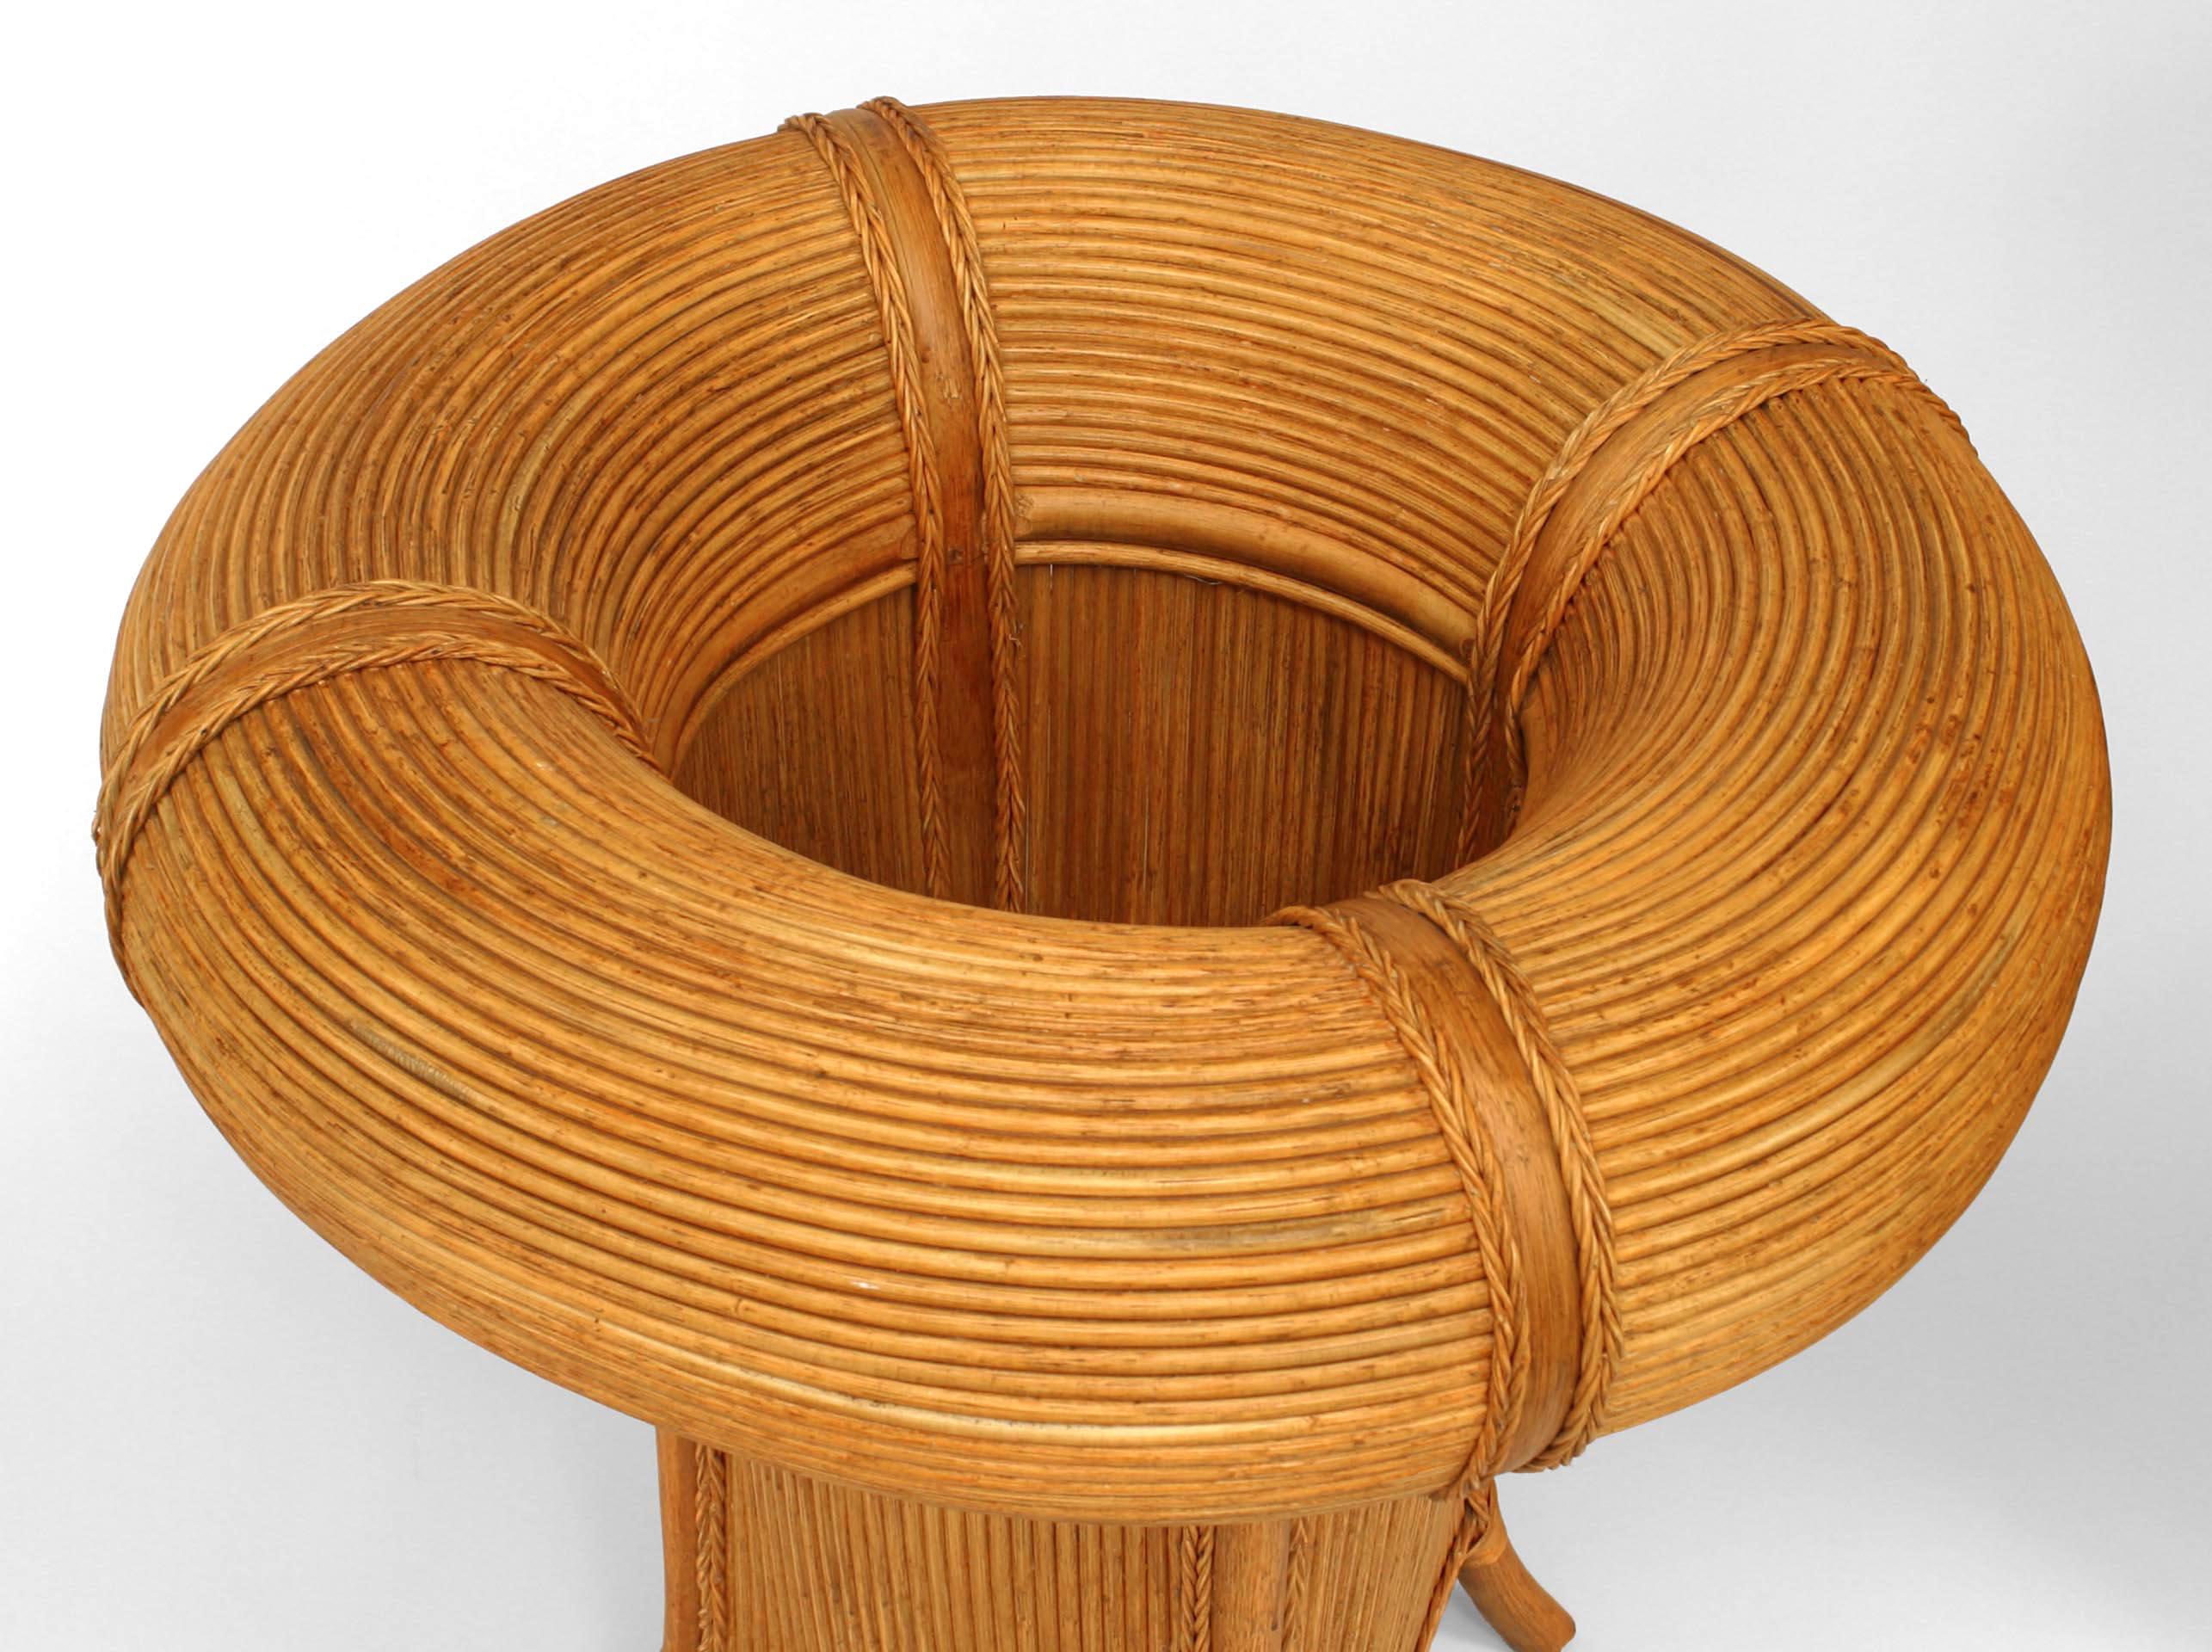 Italian Mid-Century (1950s) round rattan pedestal base caf√© table with open center well top and rope trim (Provenance: a hotel in Acqua Terra, Italy)
